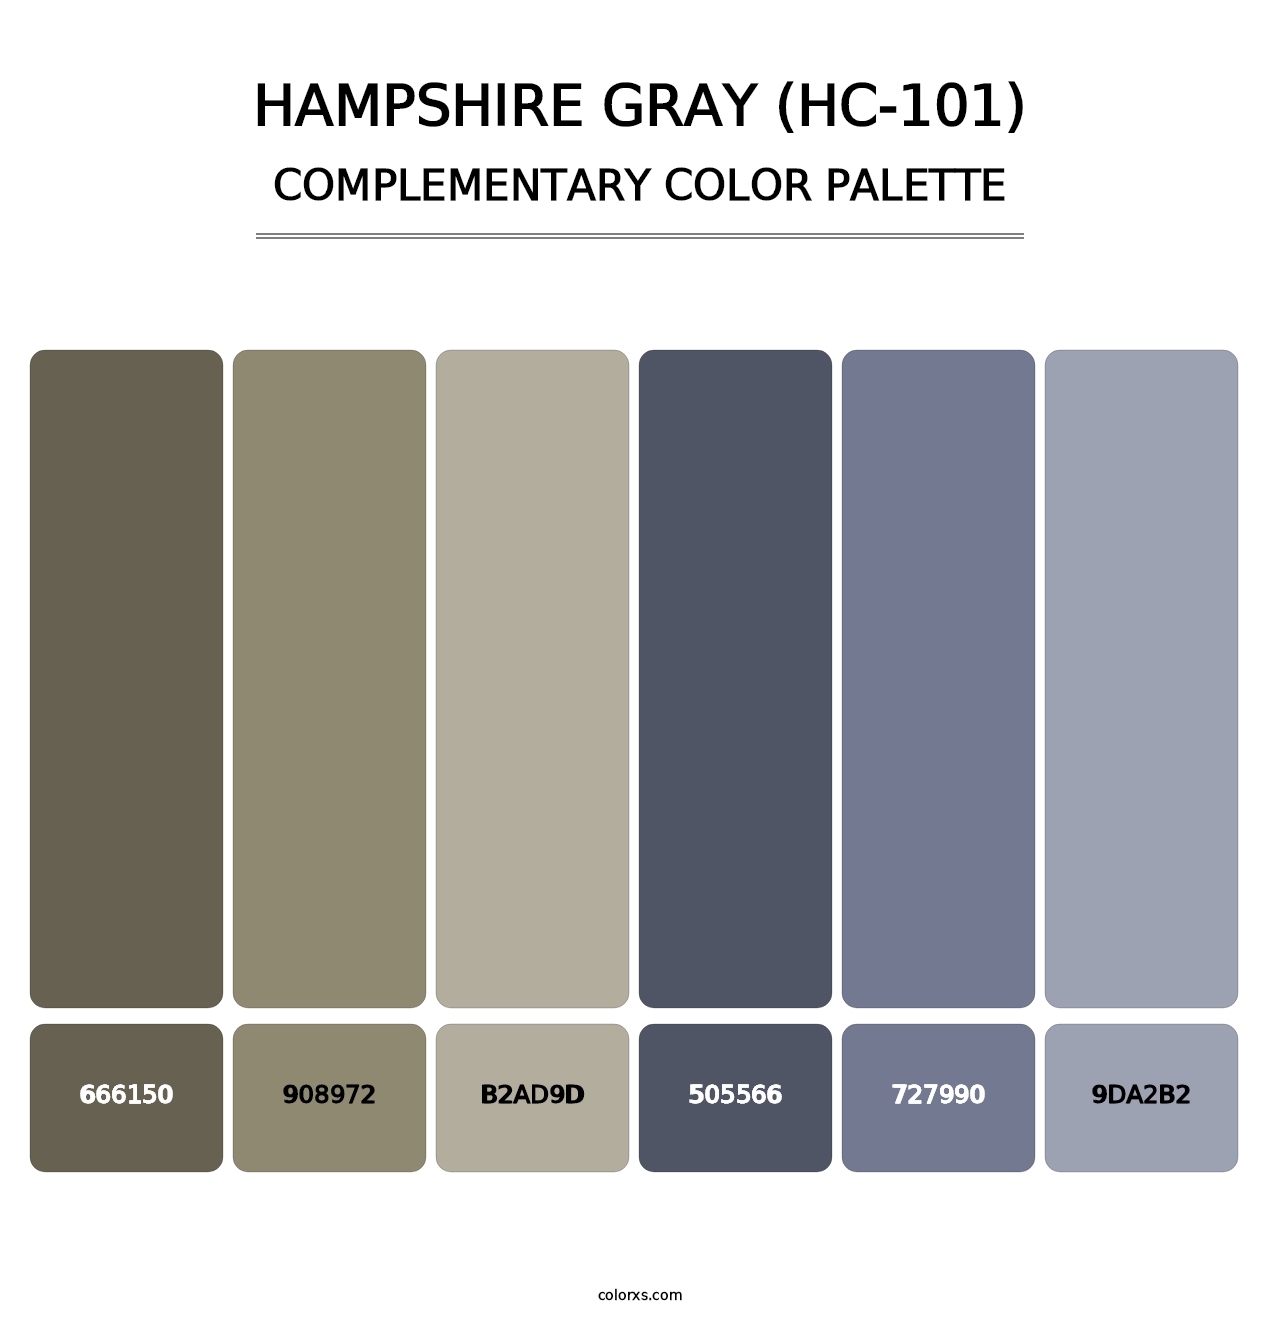 Hampshire Gray (HC-101) - Complementary Color Palette